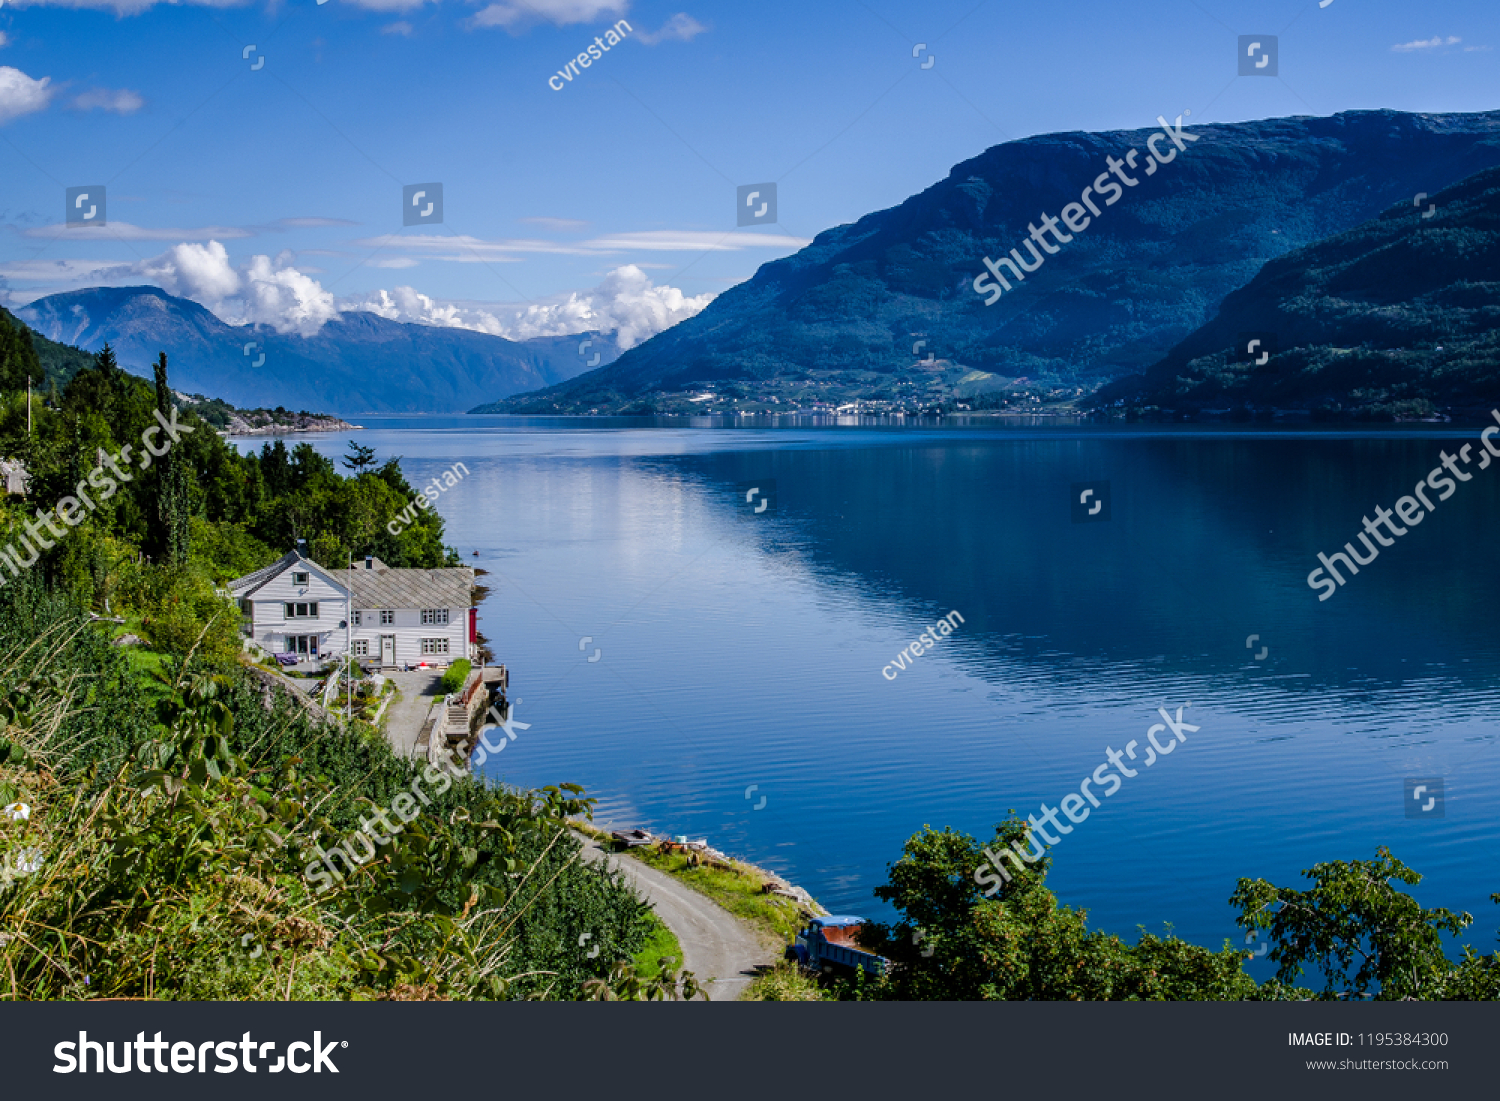 The Fjords of Norway  #1195384300